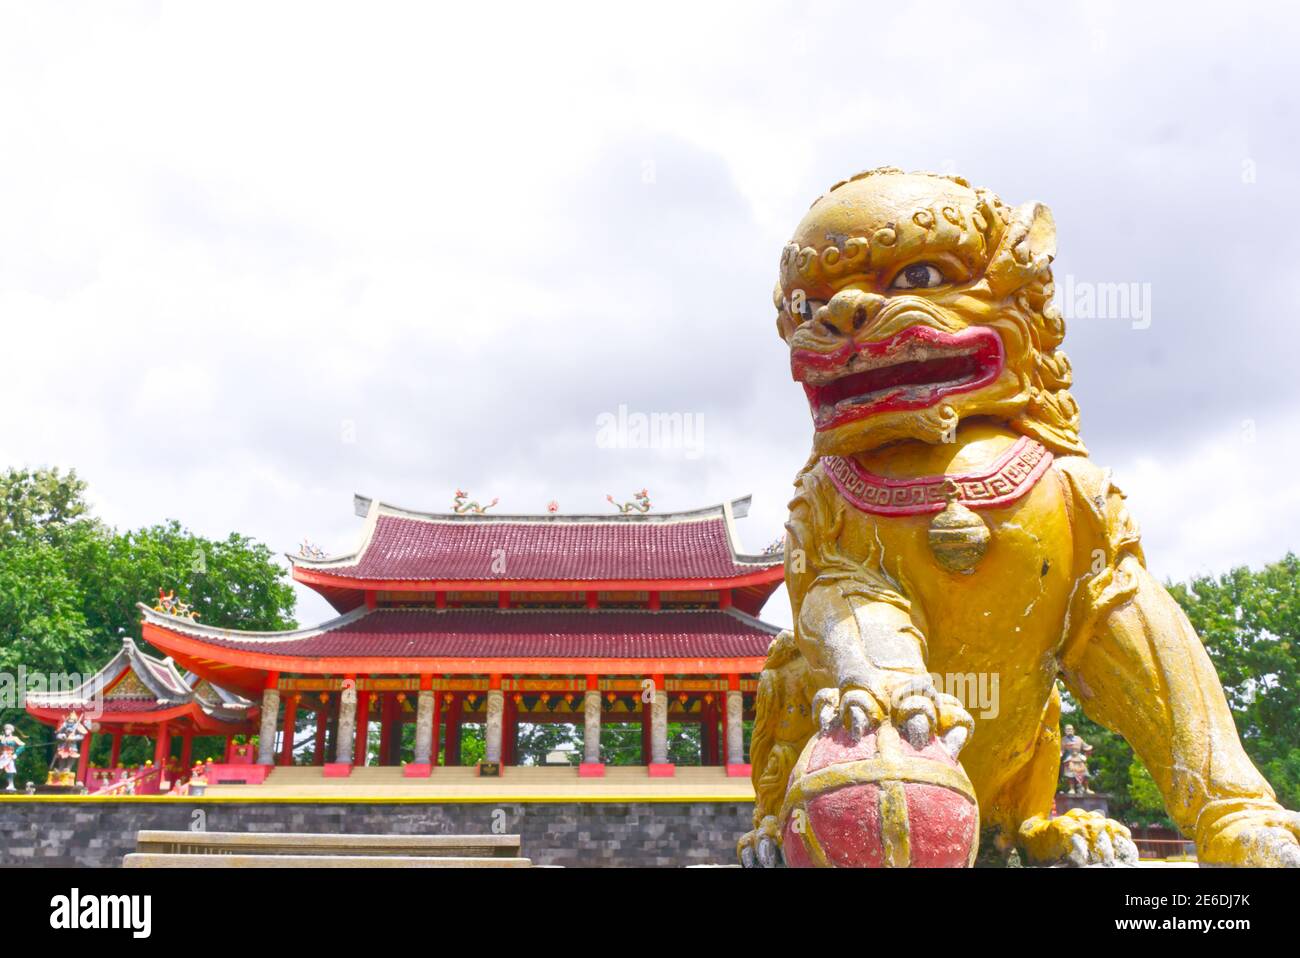 Semarang, Indonesia - January 21, 2021: Sampokong also known as Gedung Batu Temple, is the oldest Chinese temple semarang city, central java, indonesi Stock Photo